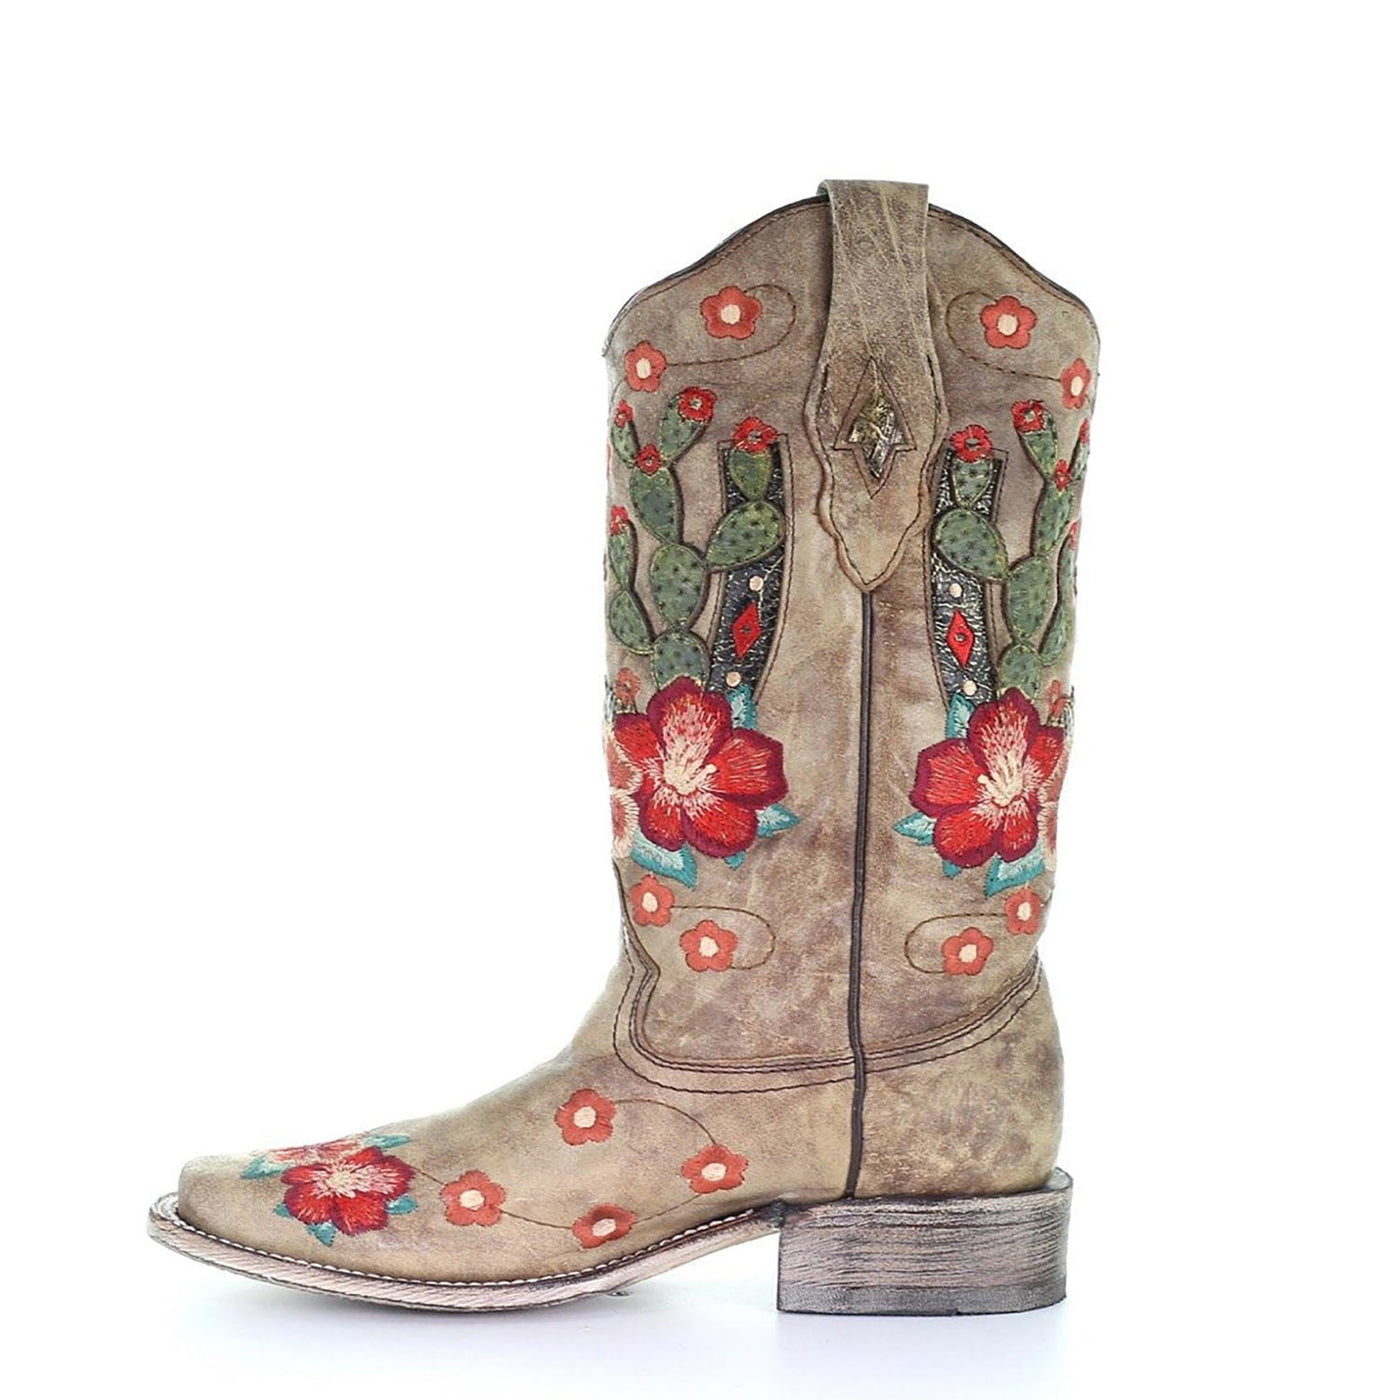 Corral | Cactus Overlay & Embroidery |Narrow Sq. Toe | Taupe